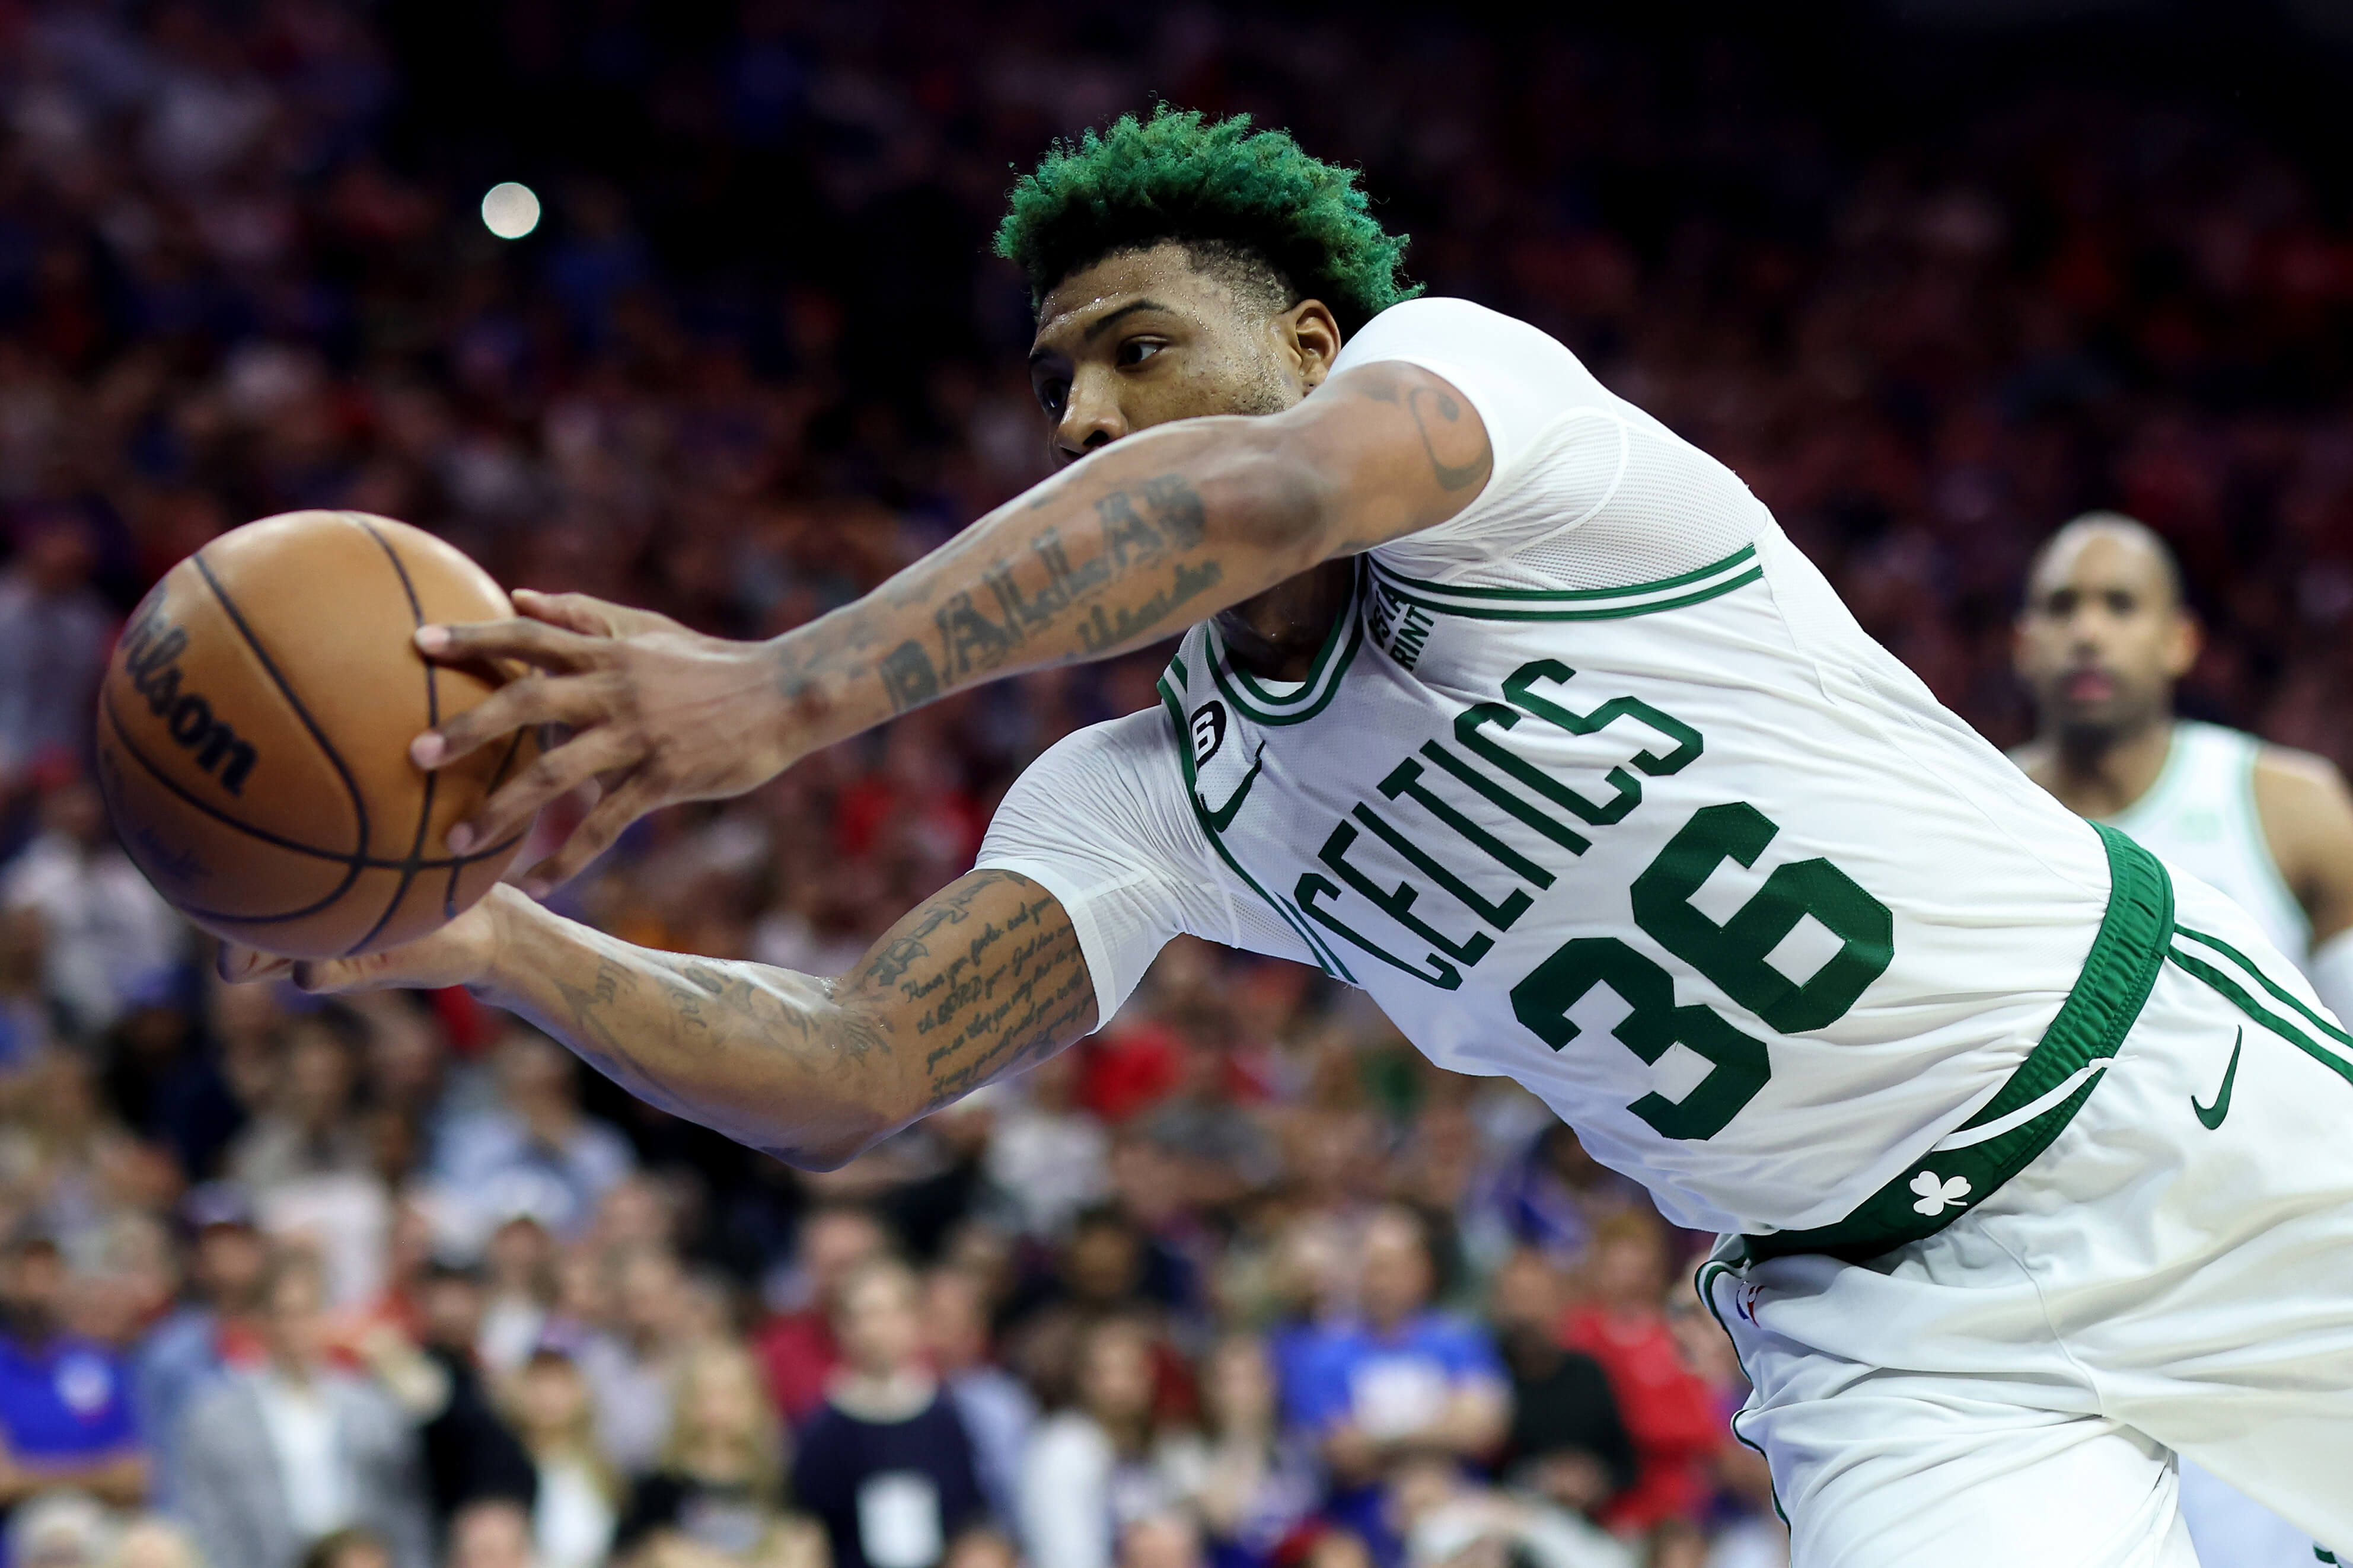 Marcus Smart of the Boston Celtics stretches to save the ball against the Philadelphia 76ers.